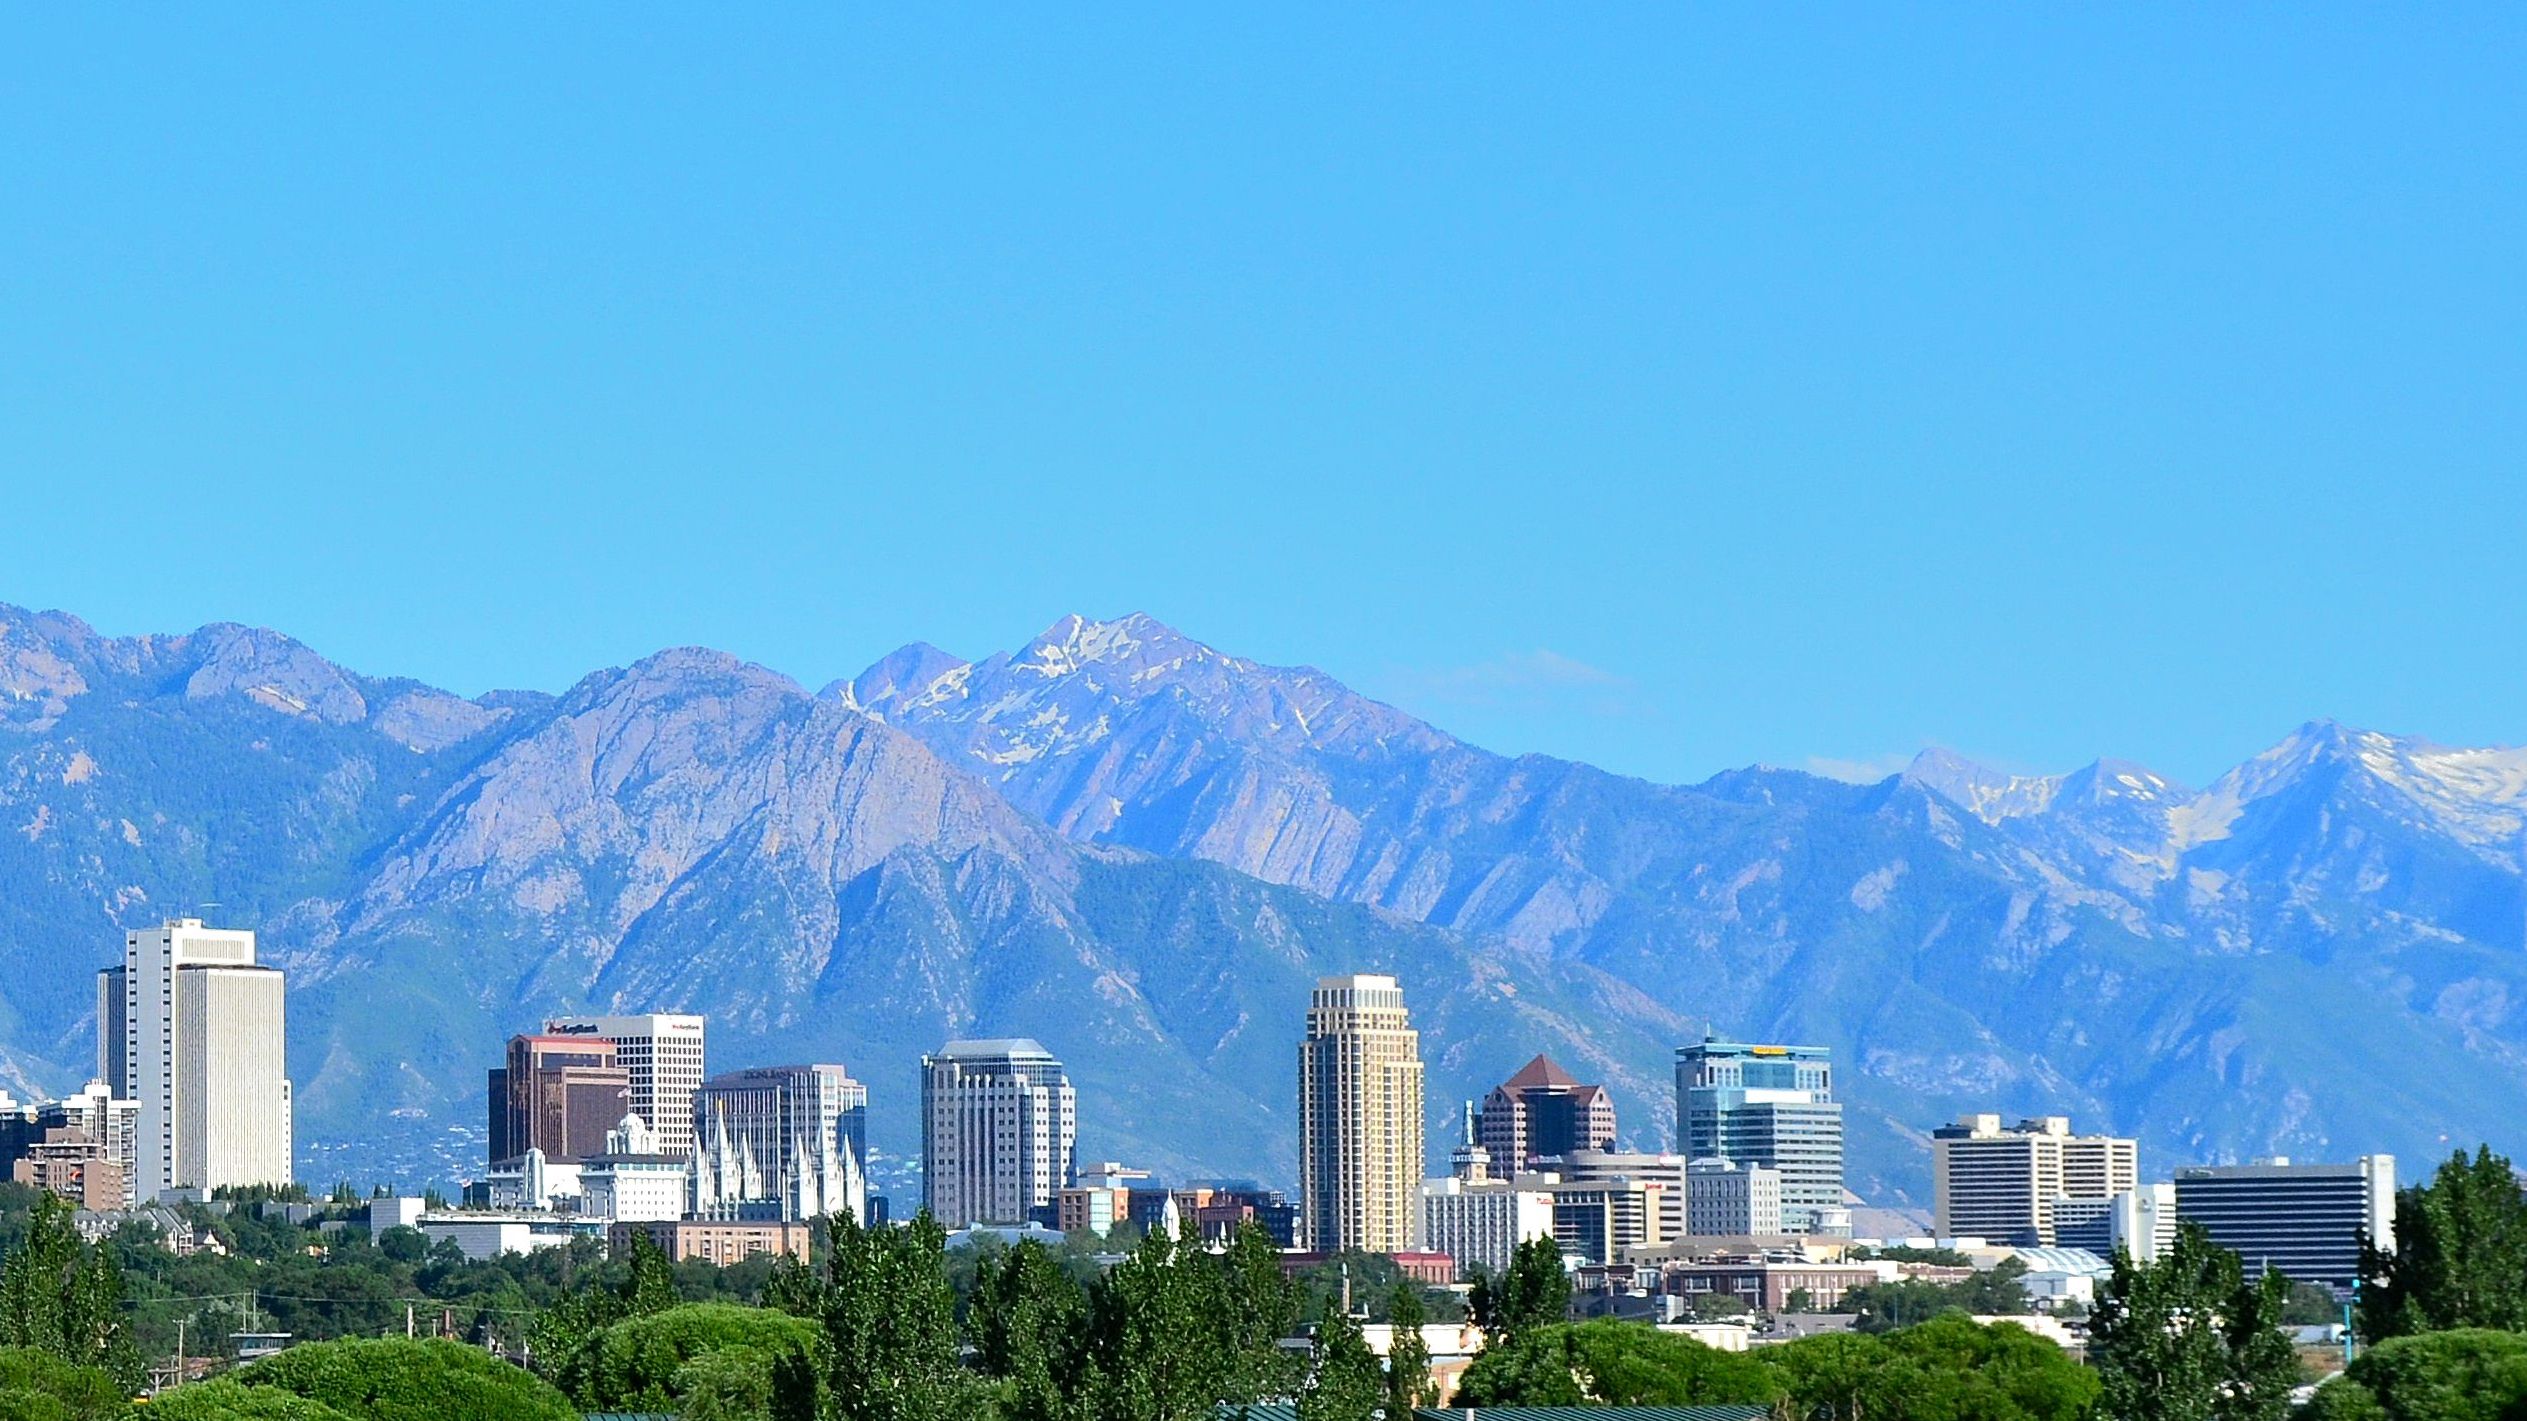 Salt Lake City skyline with mountains in the background